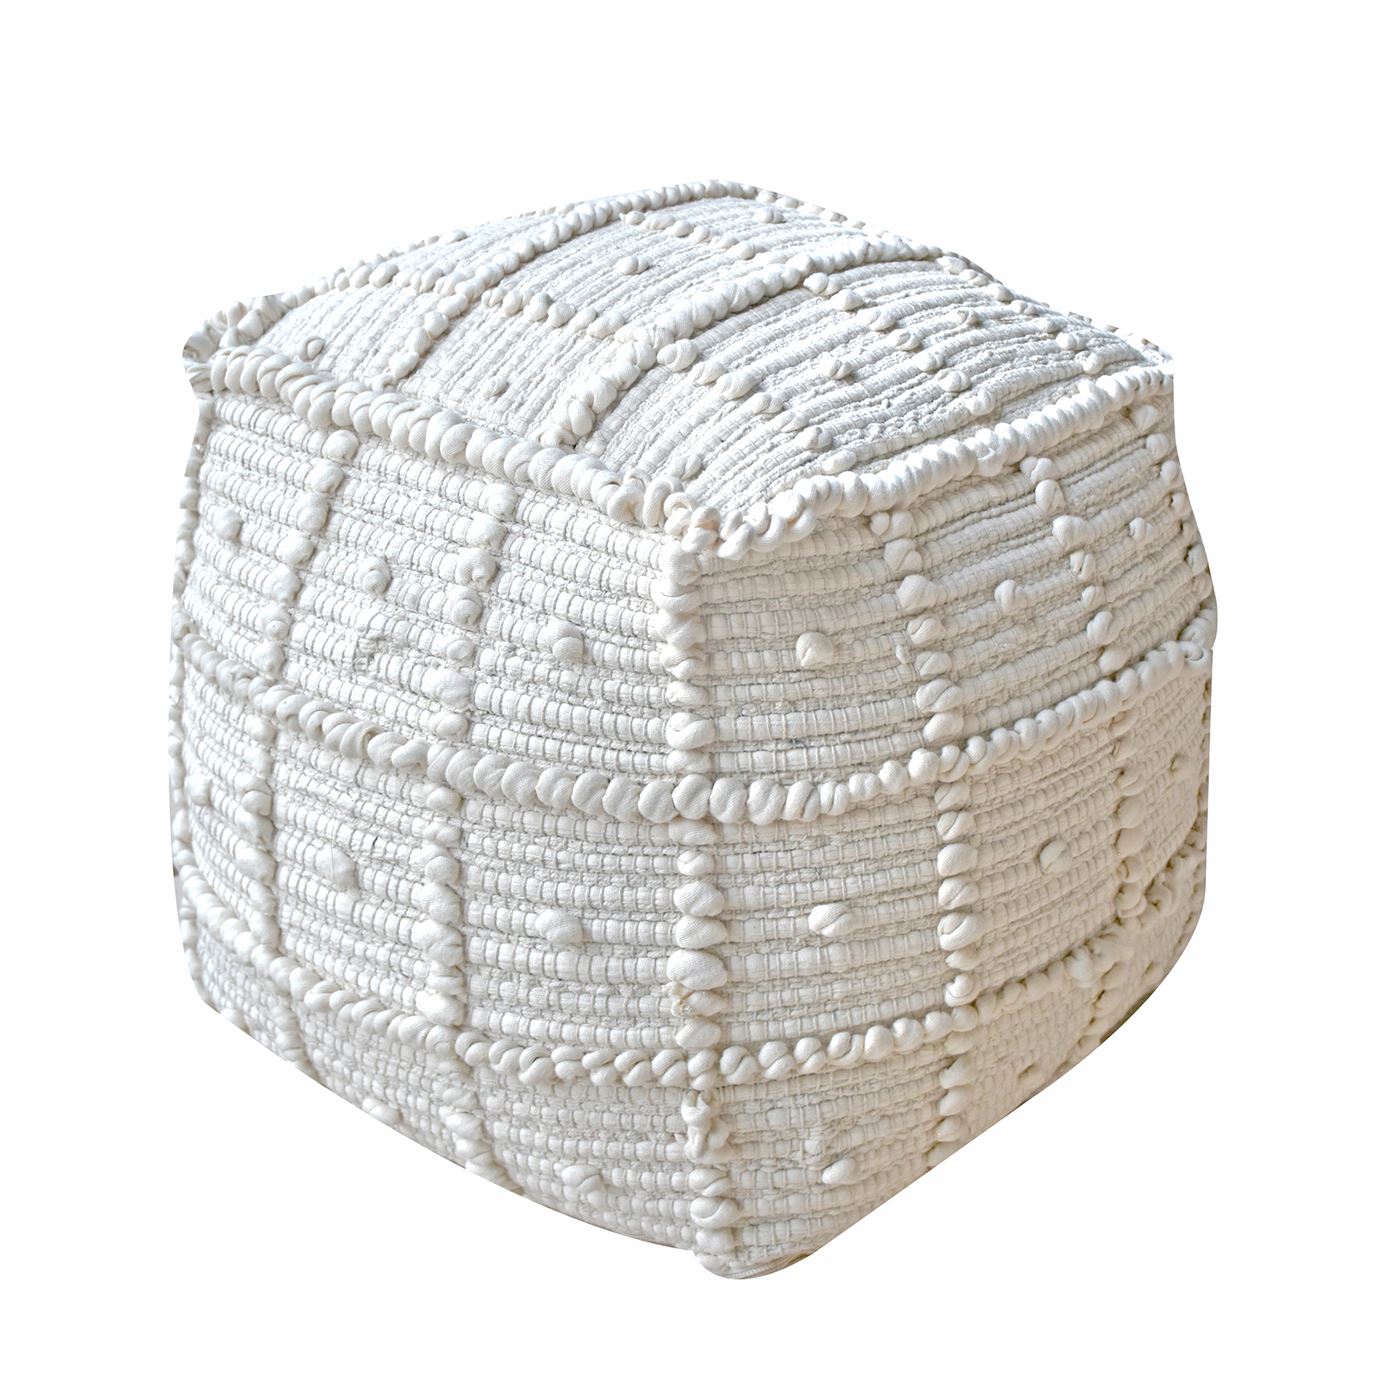 Arrino Pouf, Cotton, Natural White, Pitloom, All Loop 